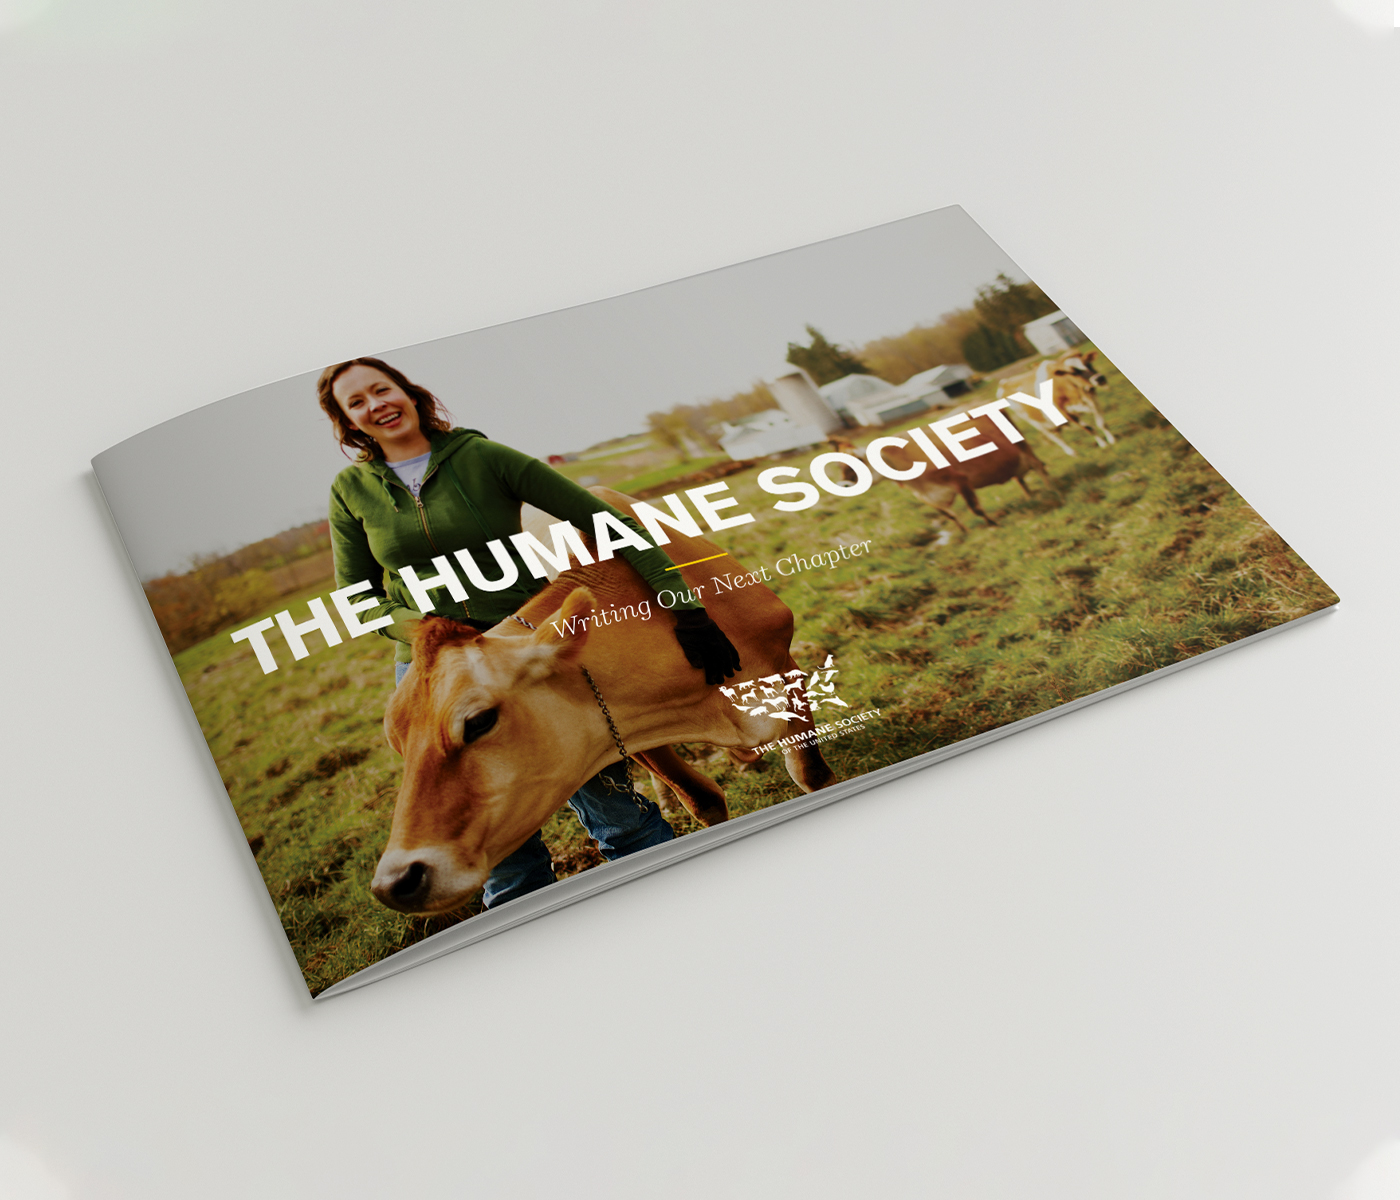 The Humaine Society Brand Book